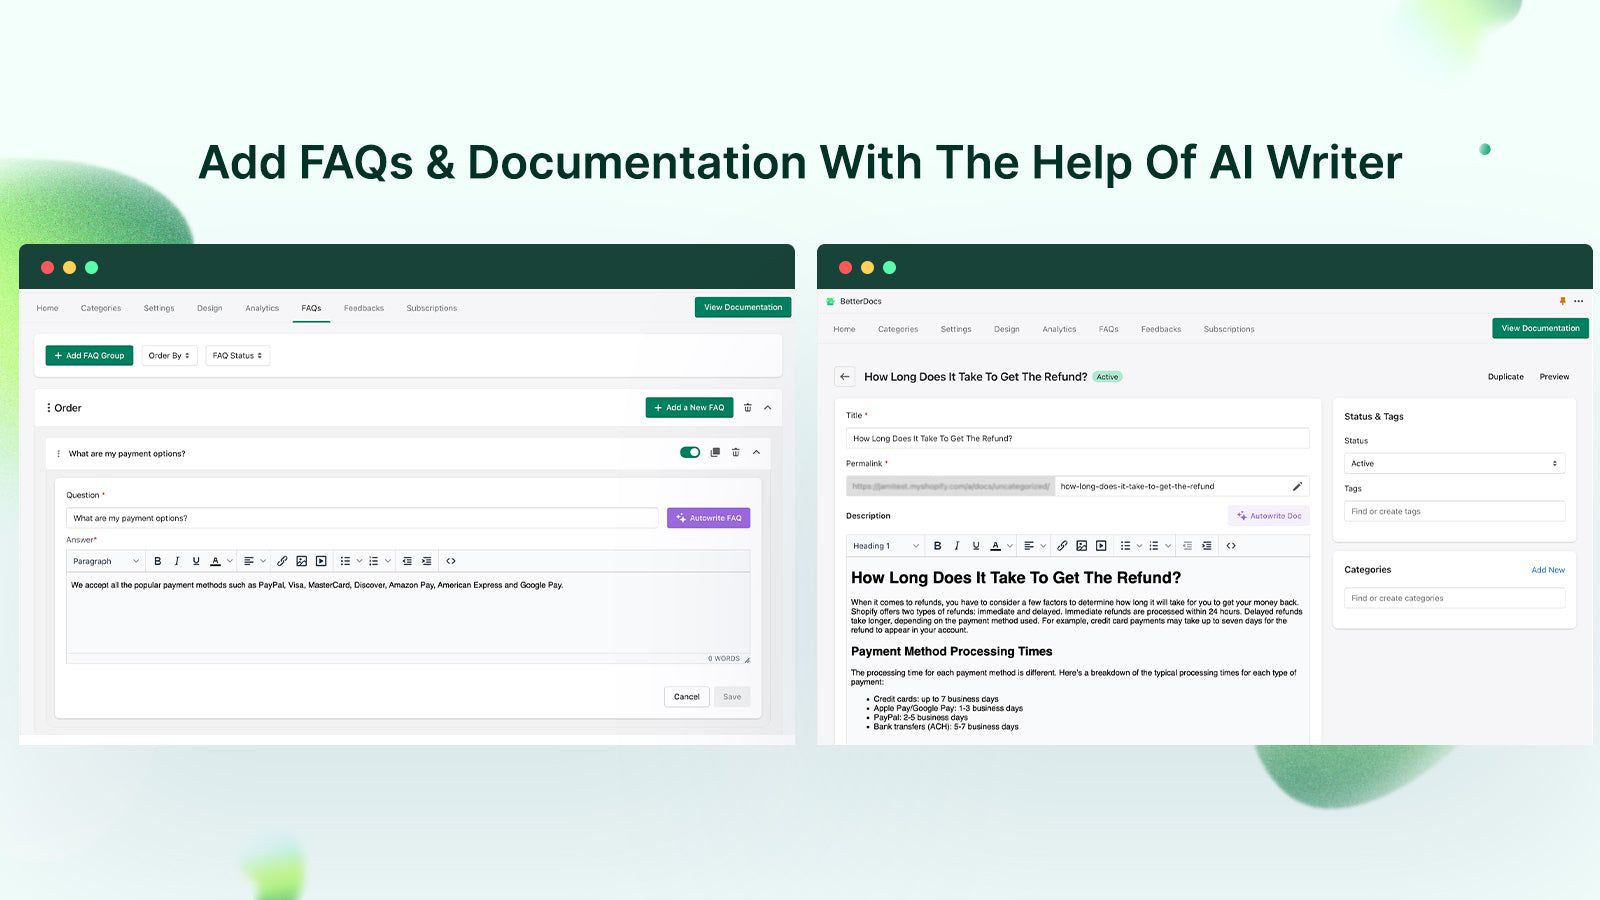 Add FAQs & Documentation With The Help Of AI Writer